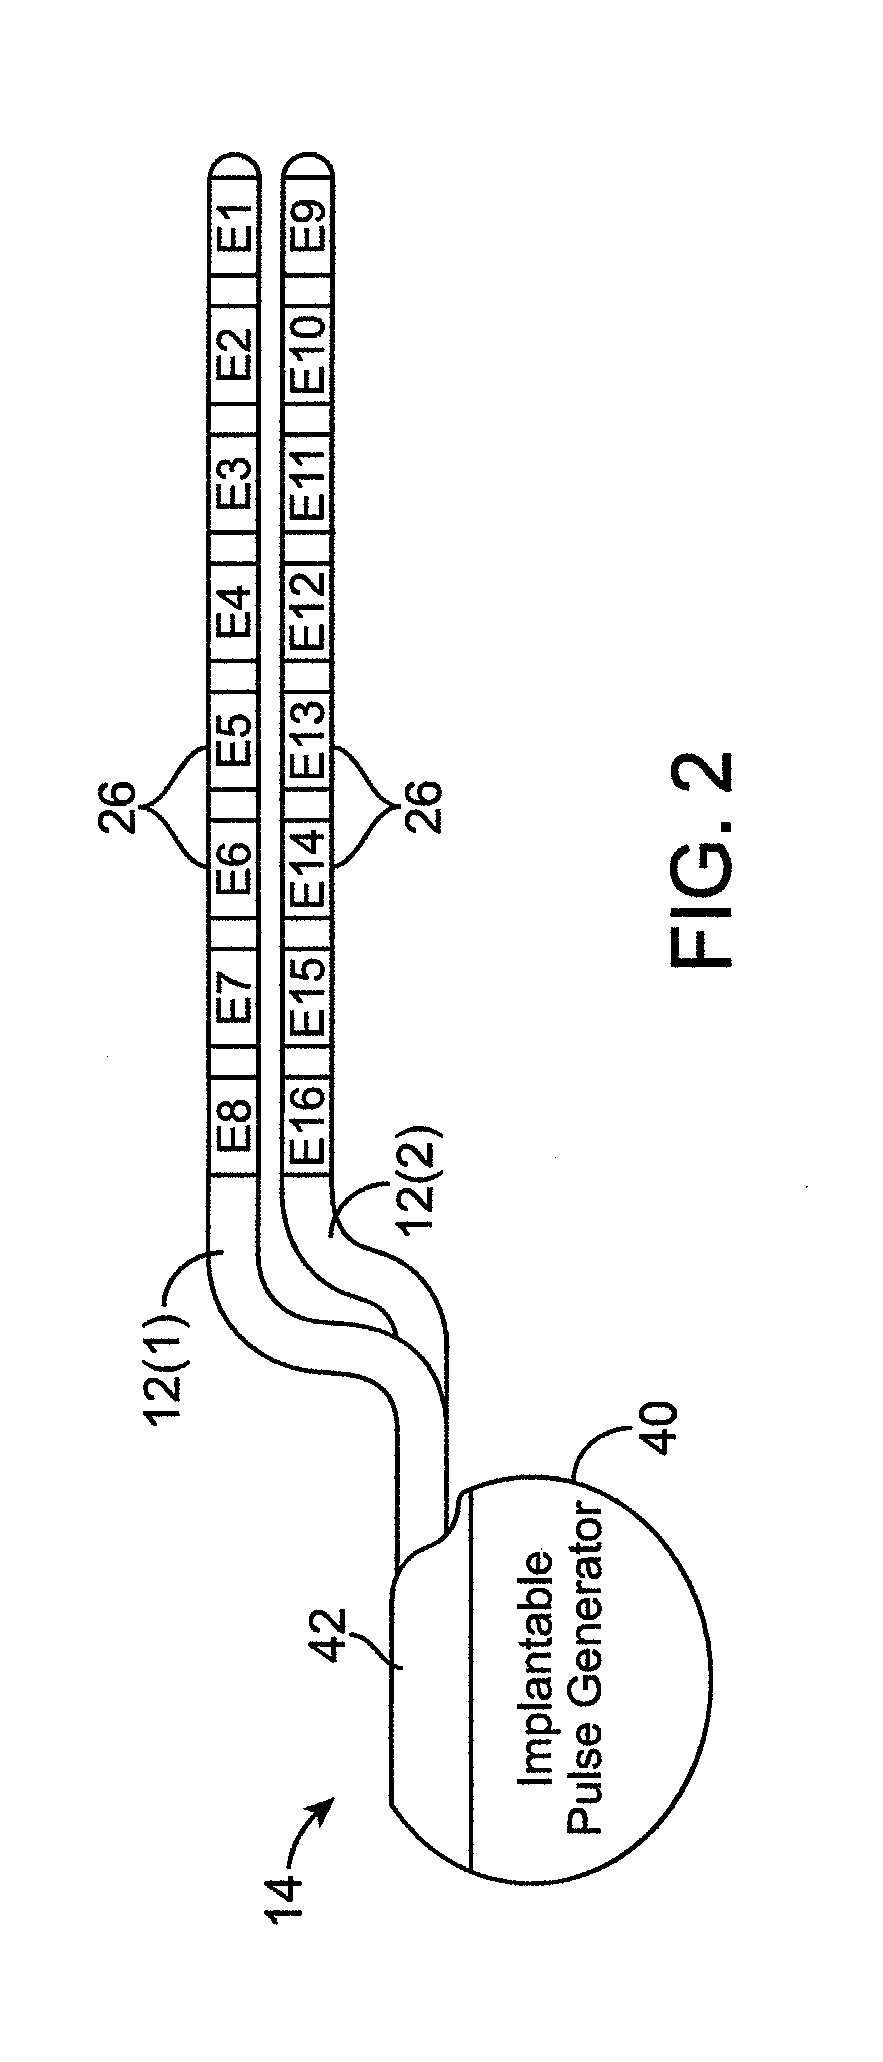 System and method for estimating lead configuration from neighboring relationship between electrodes